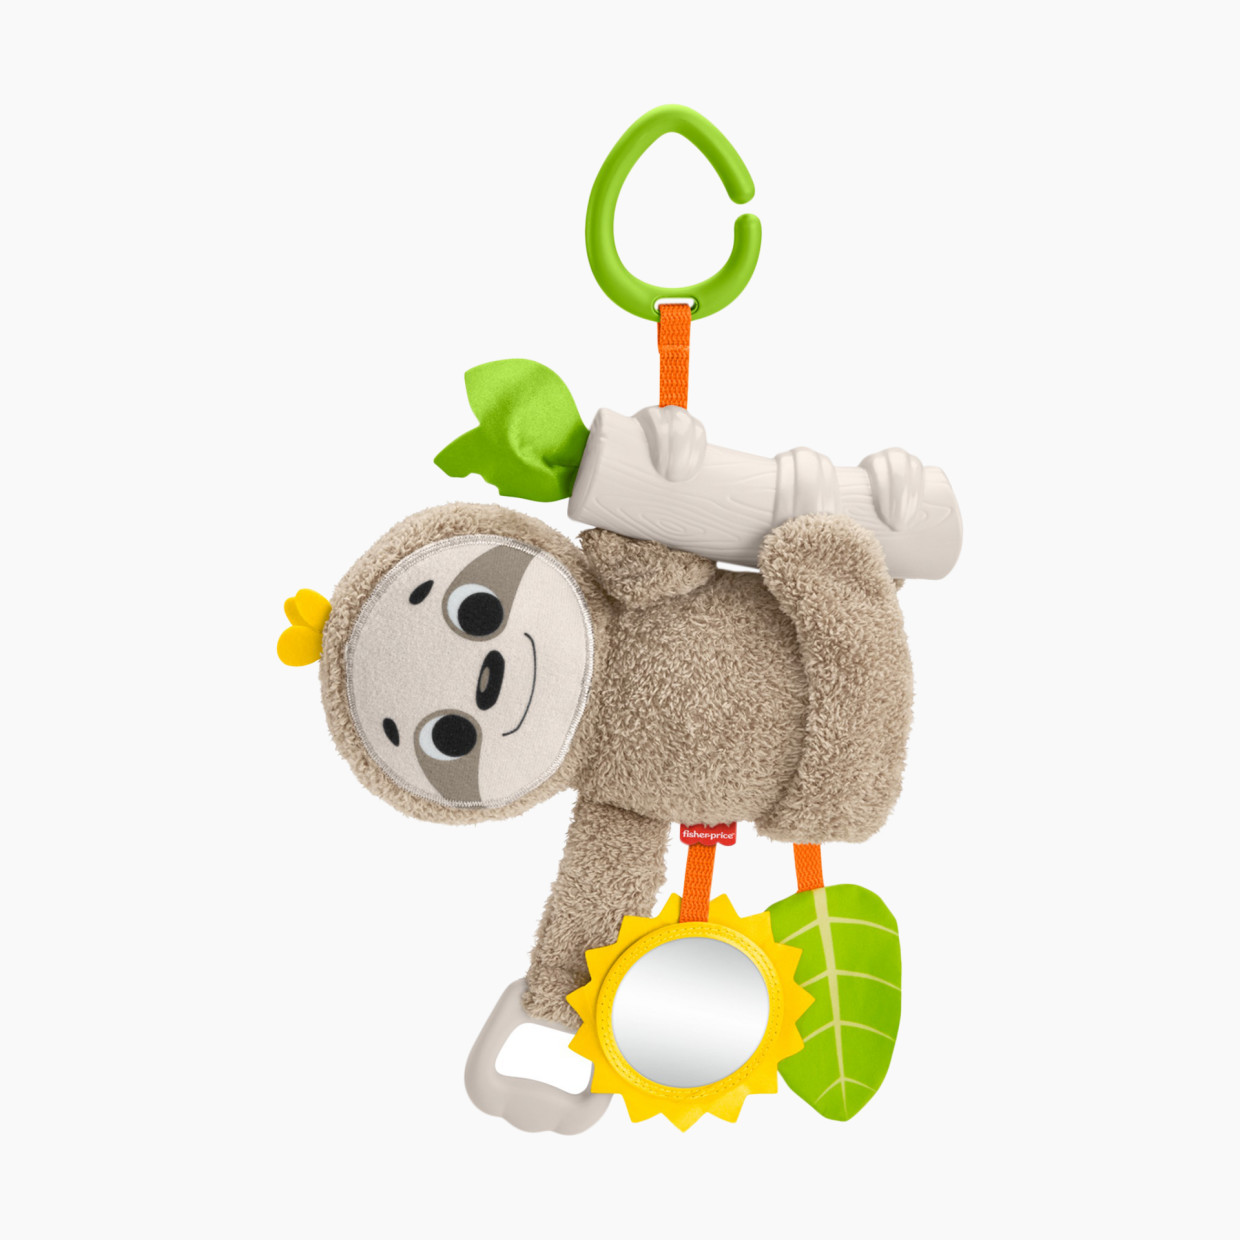 Fisher-Price Slow Much Fun Stroller Sloth.